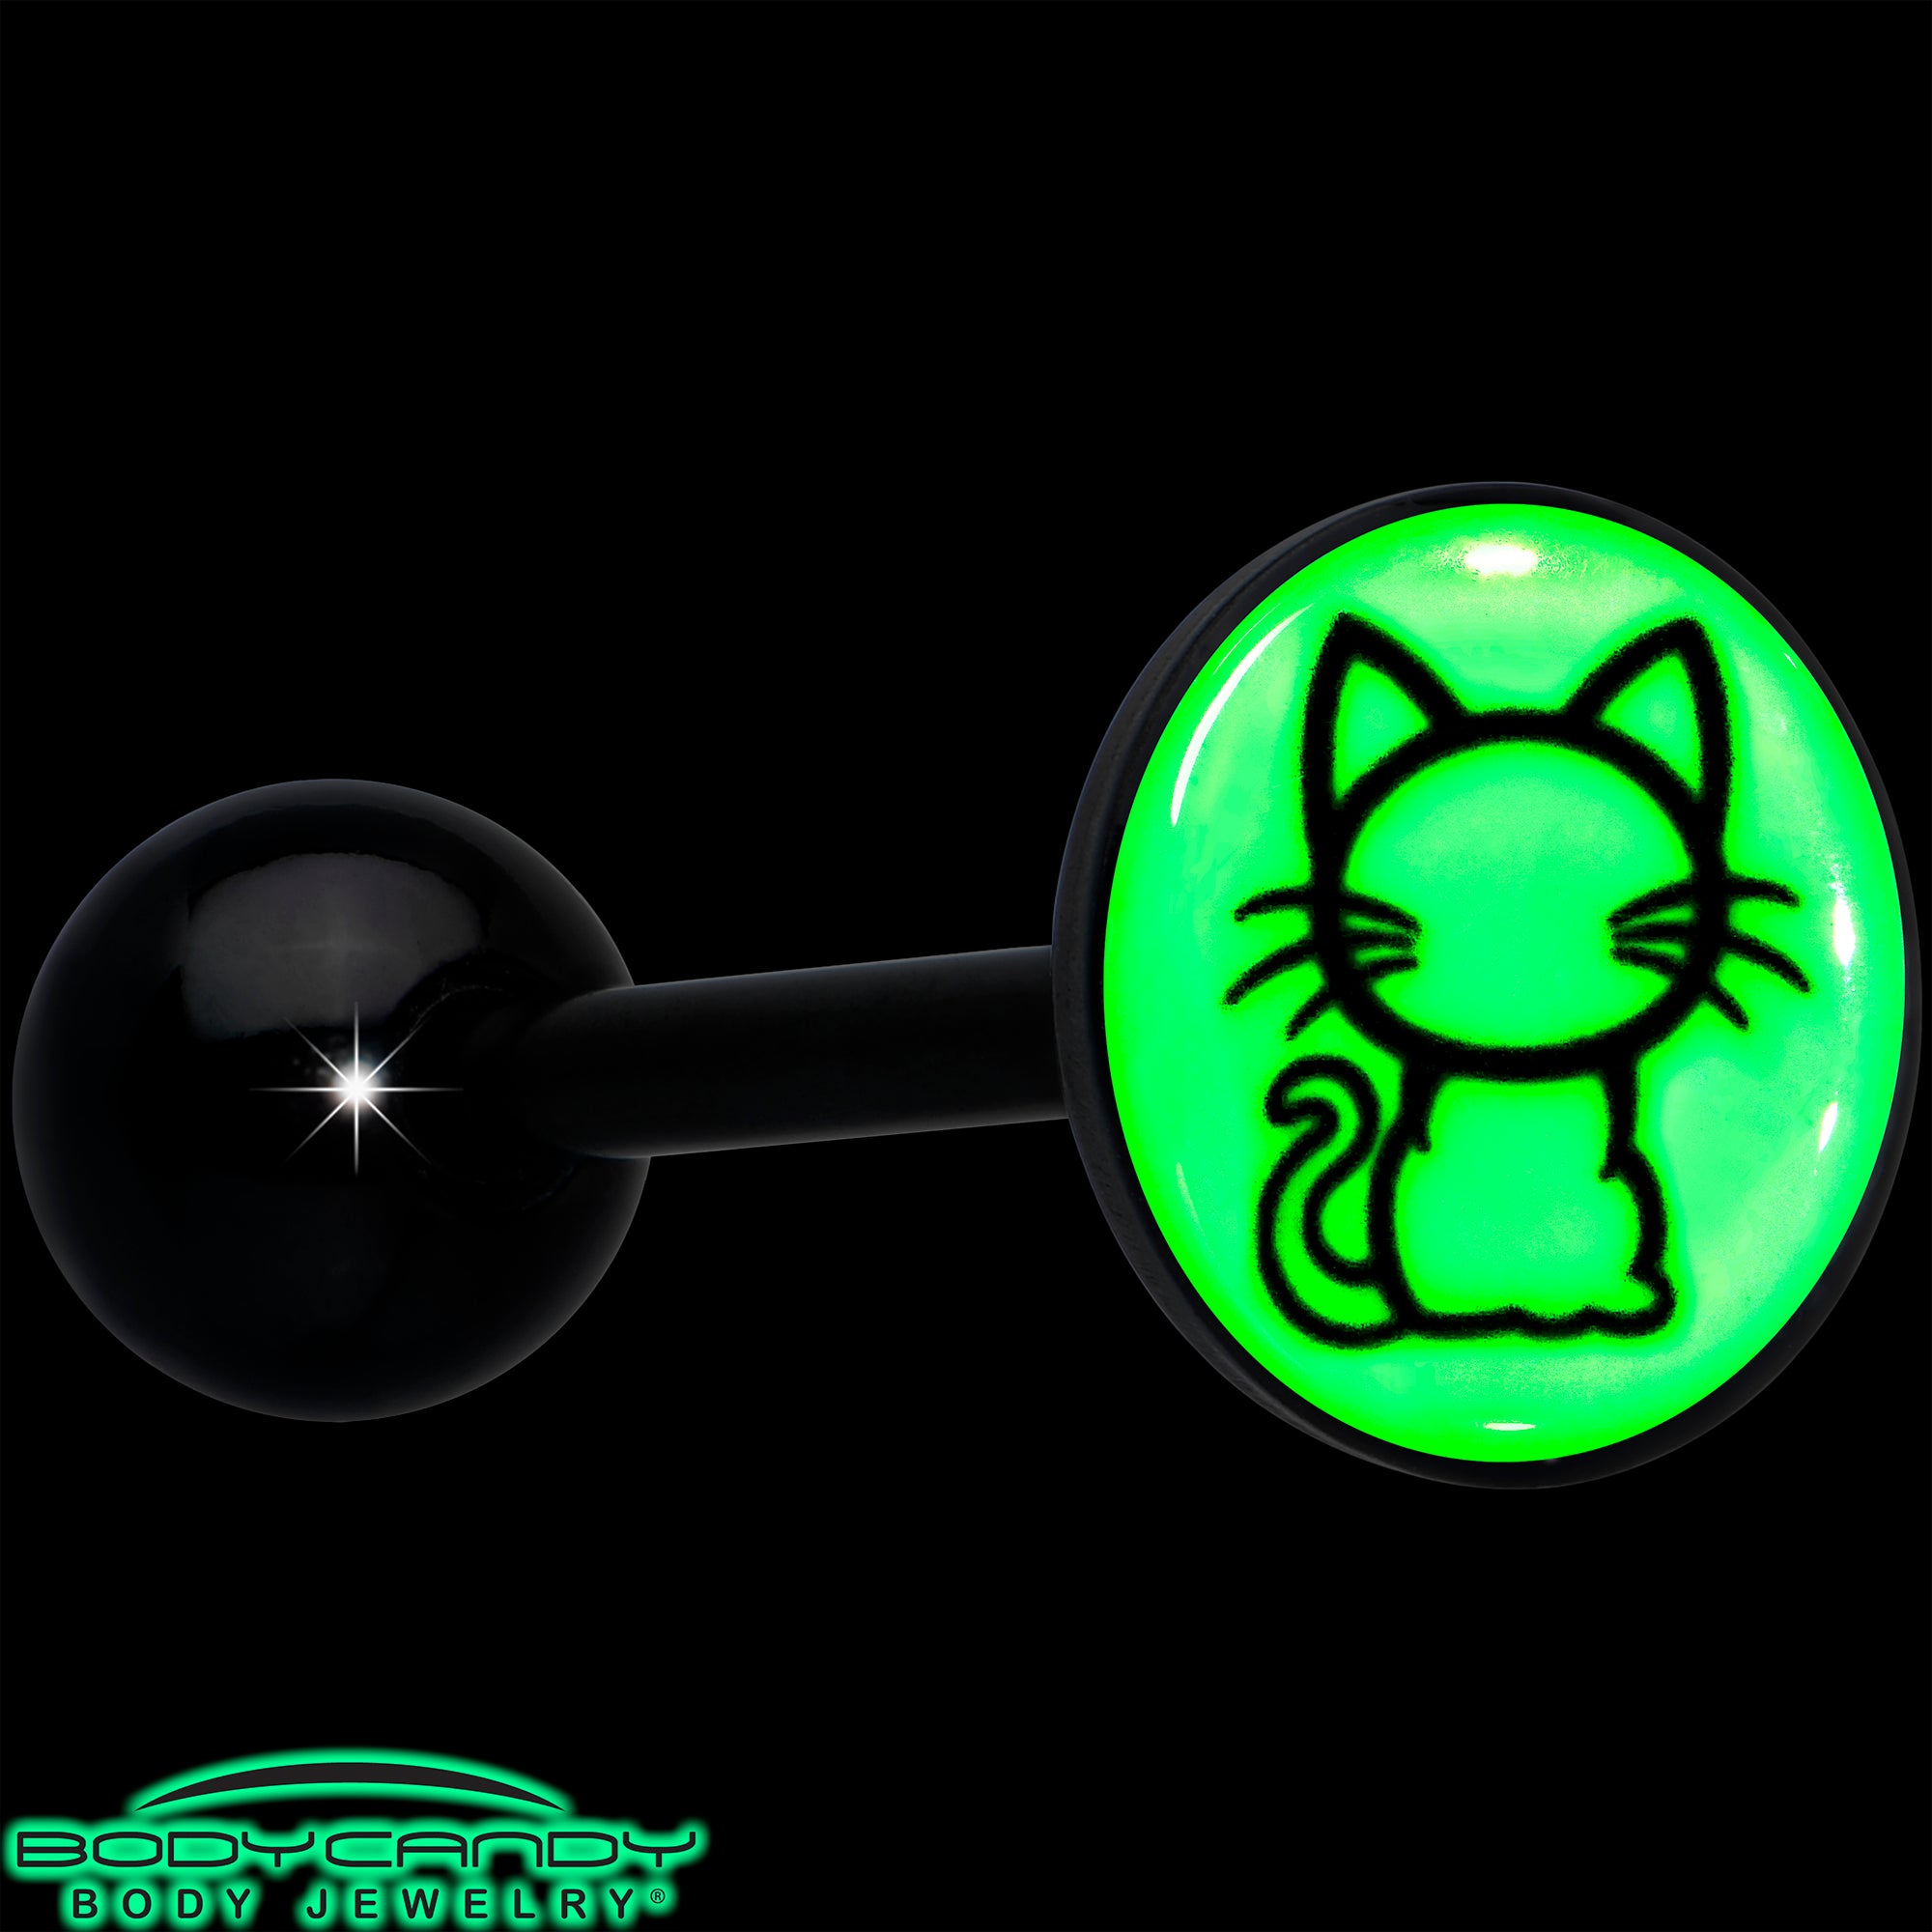 Glow in the Dark Black Anodized Kitty Cat Barbell Tongue Ring